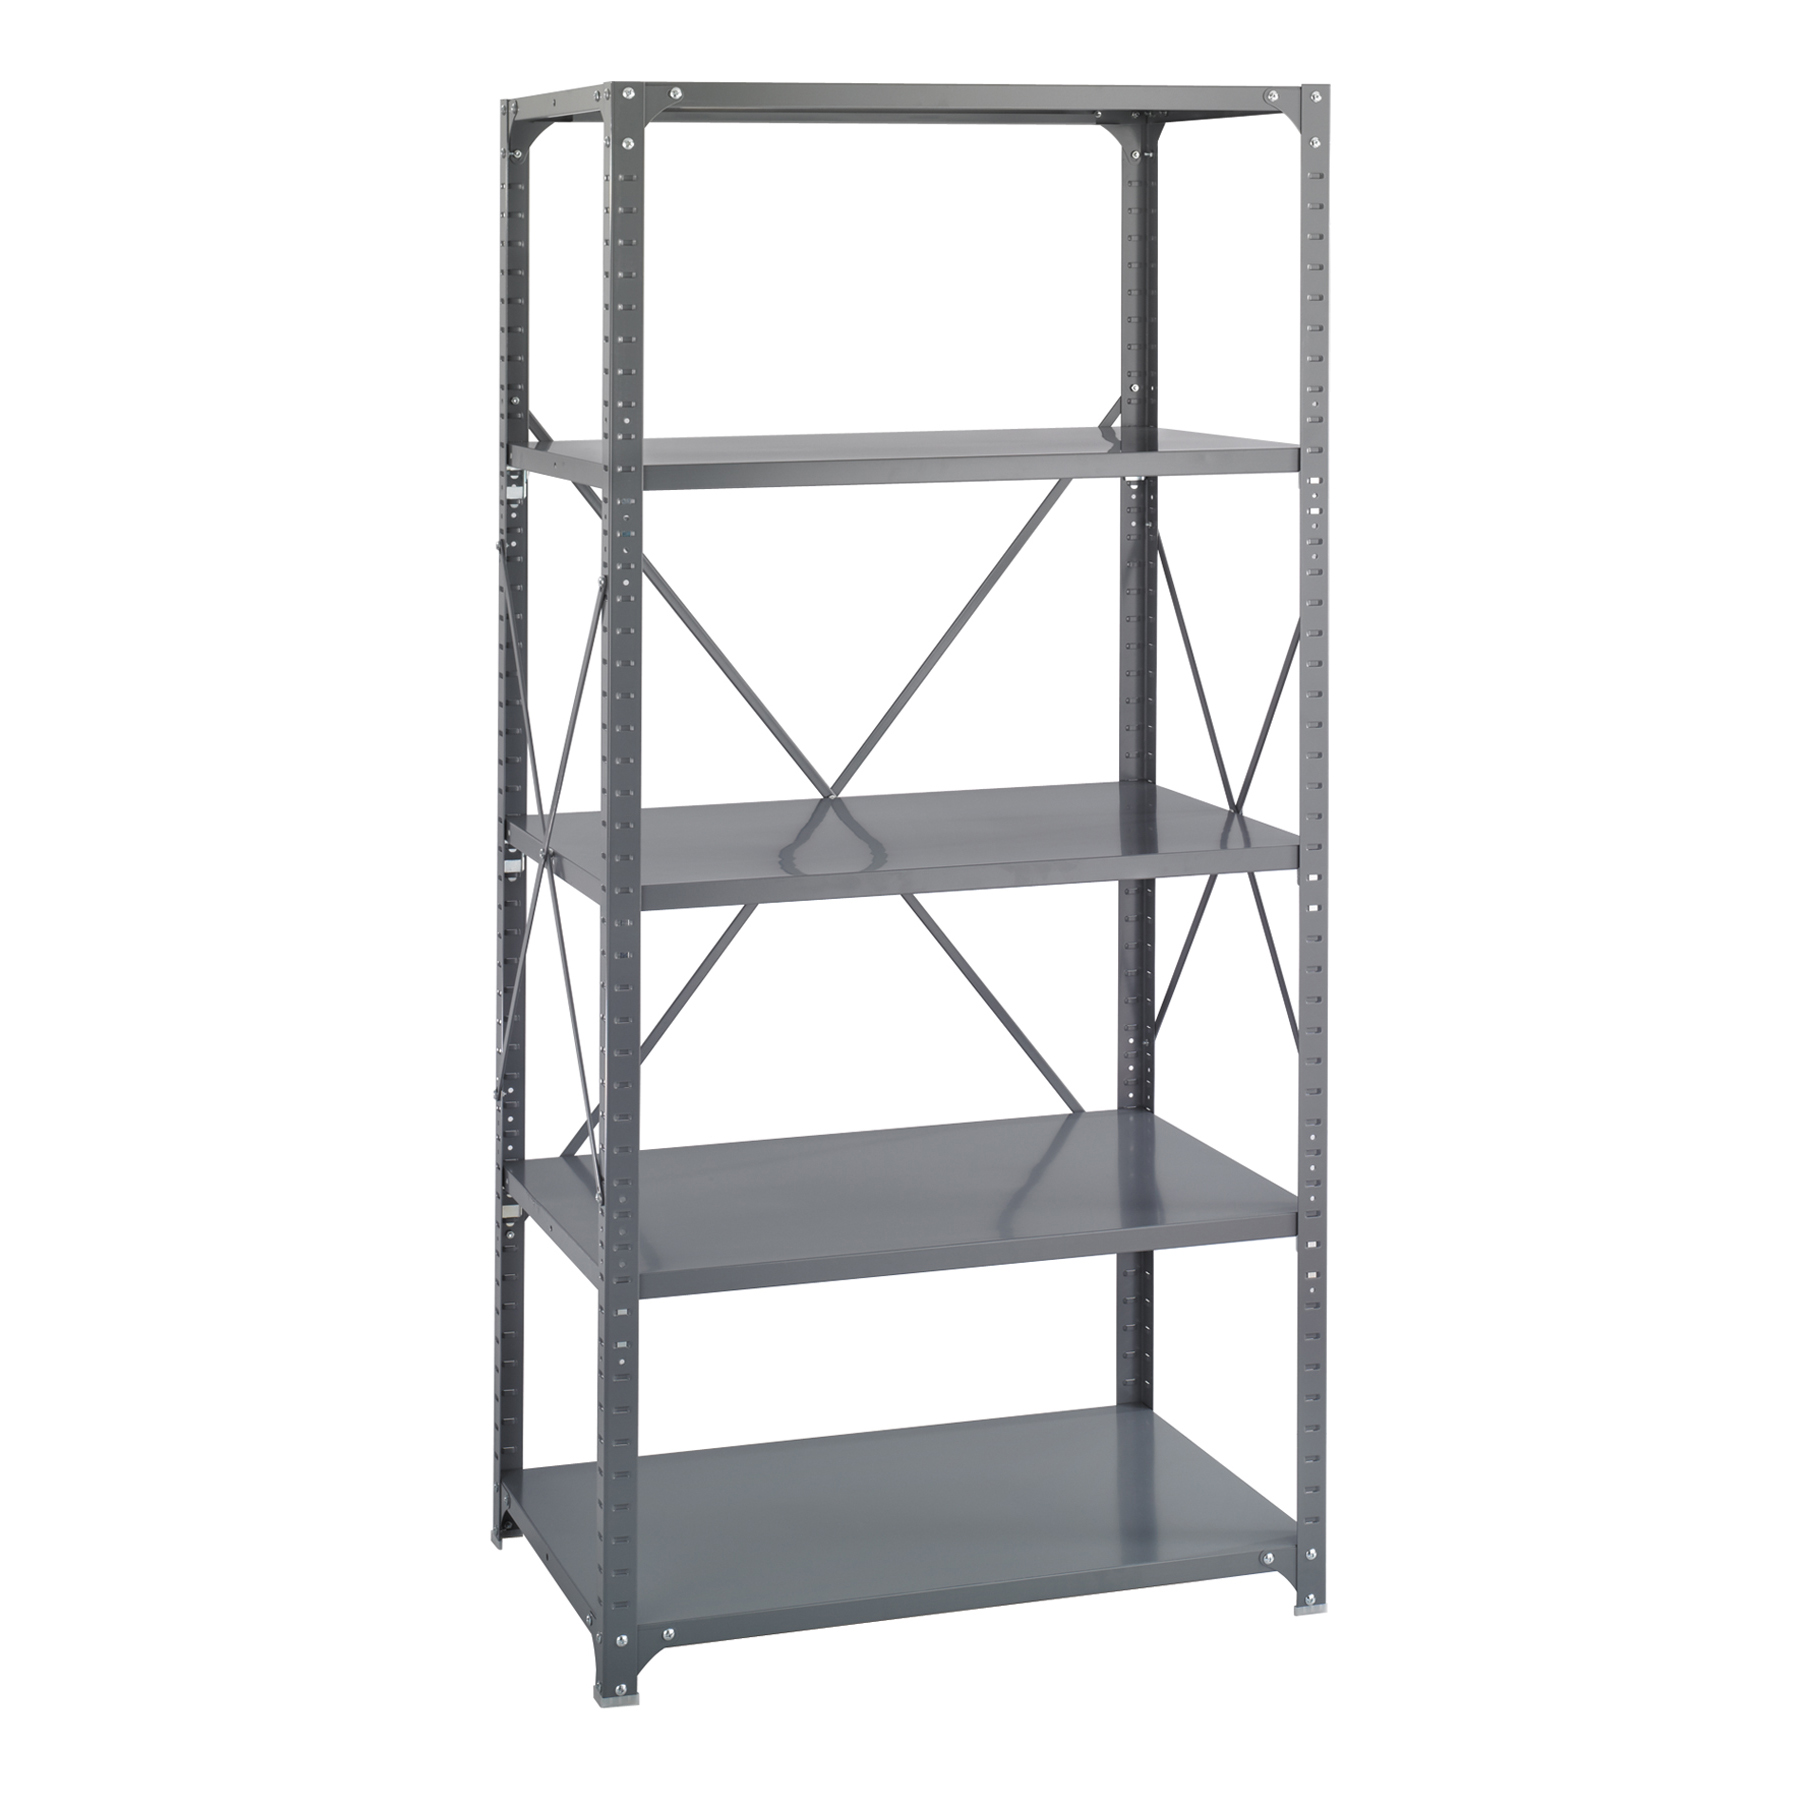 24 Commercial 5 Shelf Kit Safco S, Safco Industrial Wire Shelving